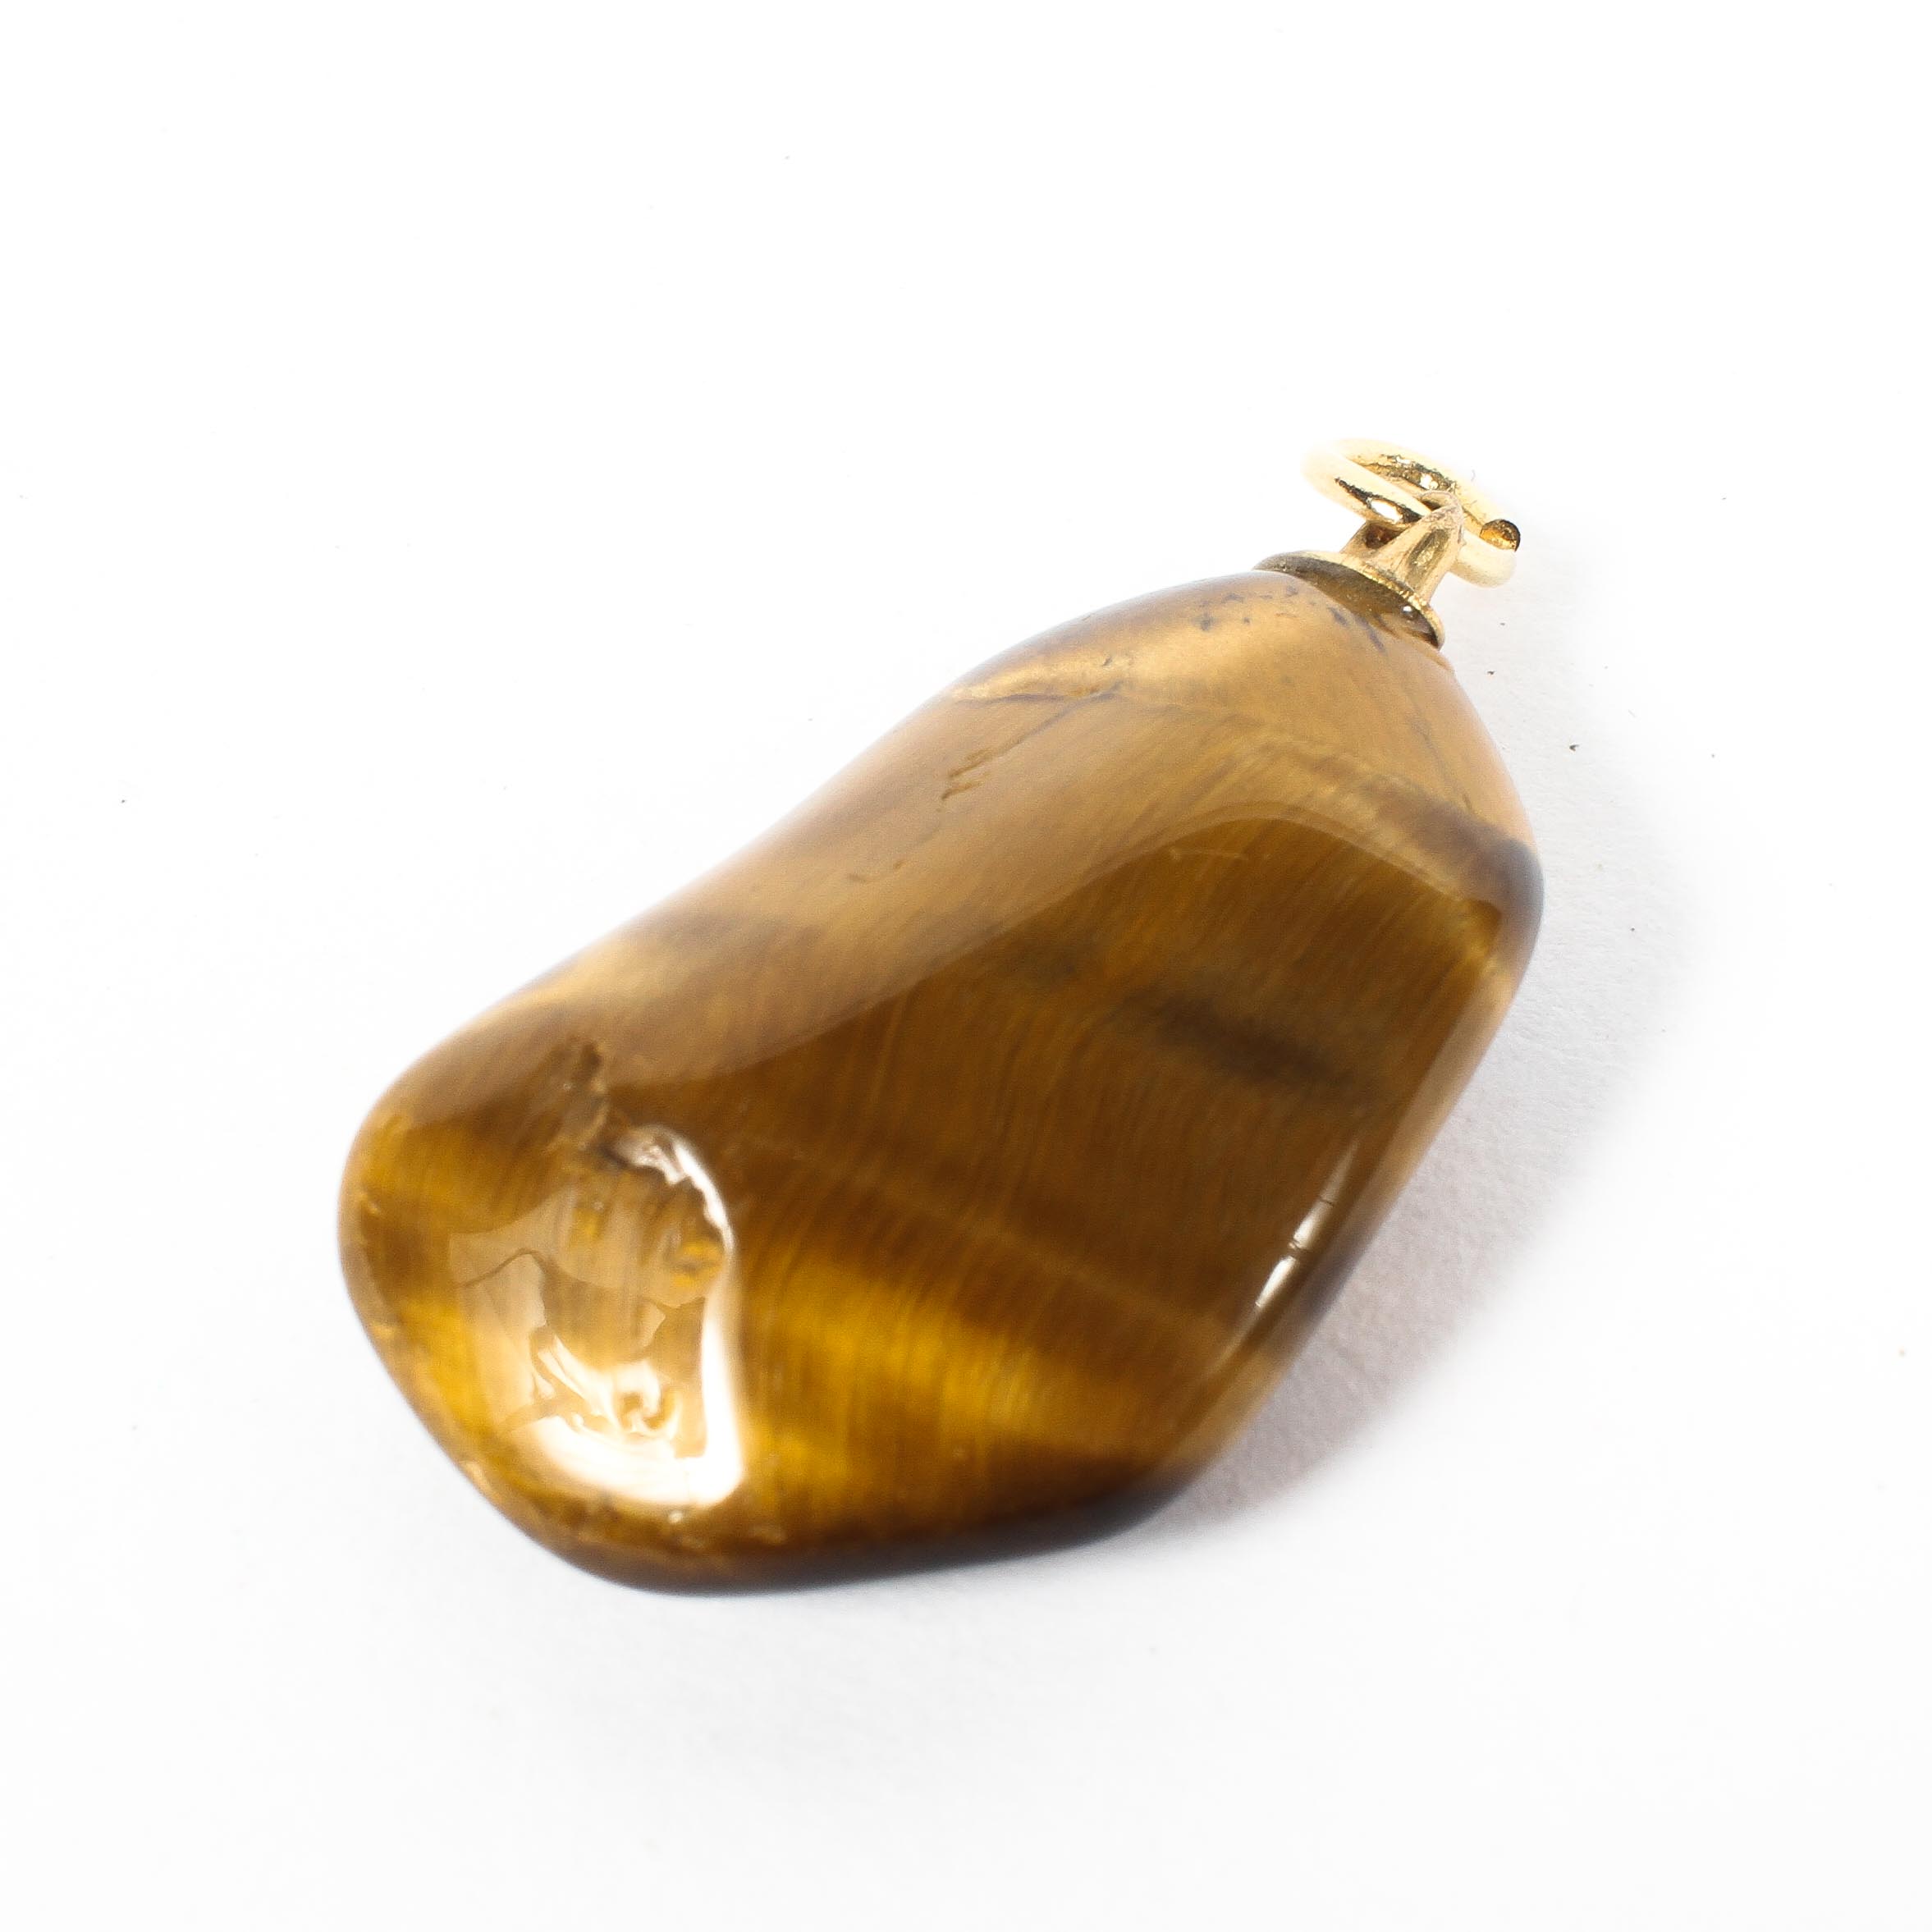 A tigers eye pendant on unmarked yellow metal bale.